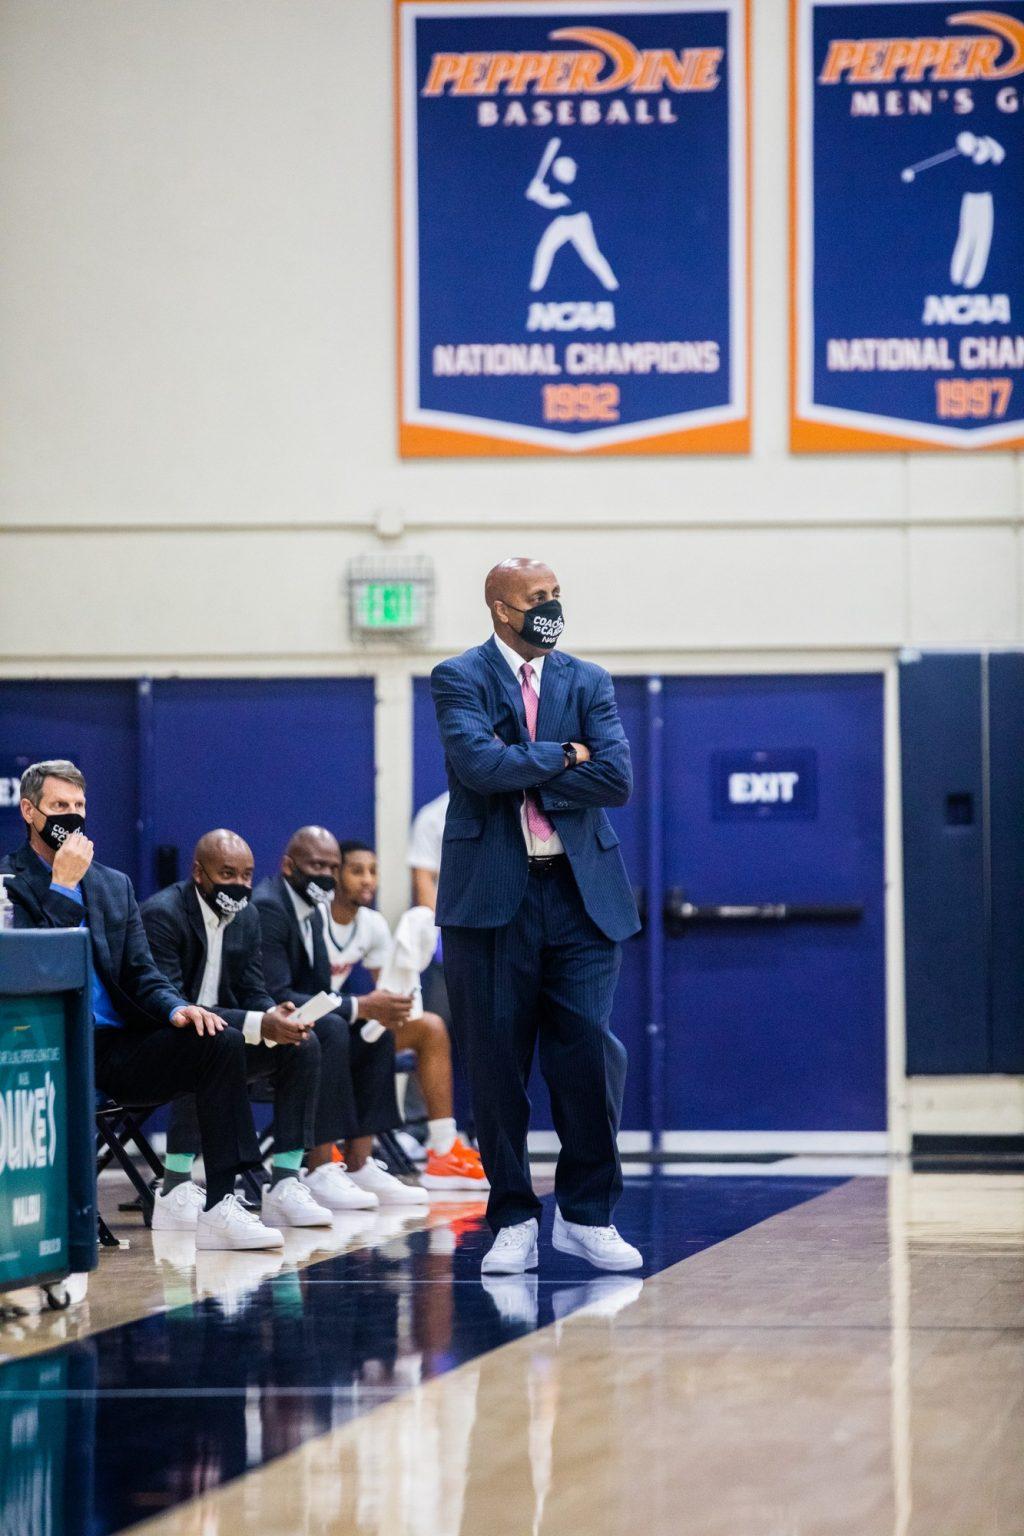 Pepperdine Head Coach Lorenzo Romar patrols the bench during his team&squot;s loss to the Gonzaga Bulldogs. Romar said after the game that the Zags "really could win a national championship."